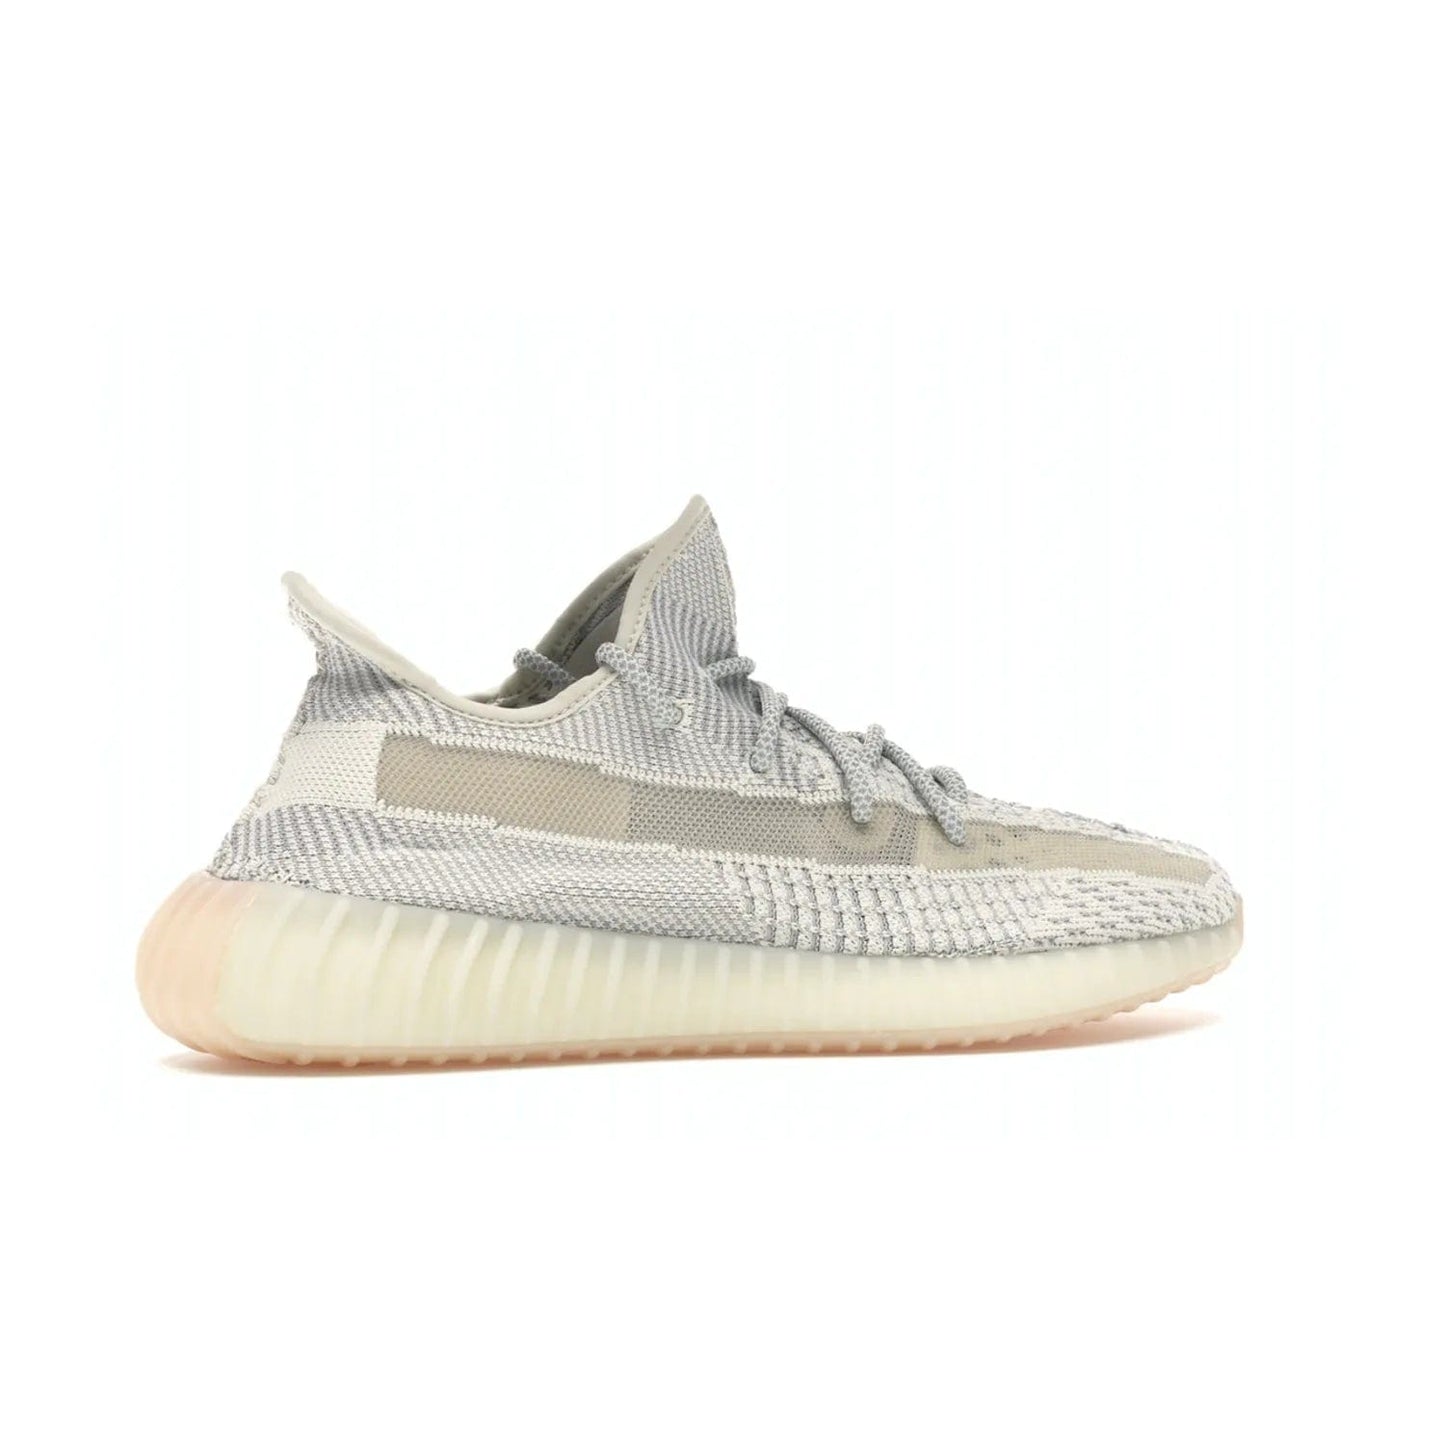 adidas Yeezy Boost 350 V2 Lundmark (Non Reflective) - Image 35 - Only at www.BallersClubKickz.com - Shop the exclusive adidas Yeezy Boost 350 V2 Lundmark with a subtle summer color, mesh upper, white-to-cream transitional midsole, light tan outsole, and pink middle stripe. Comfort and style come together in this perfect summer 350 V2. Released on July 11, 2019.